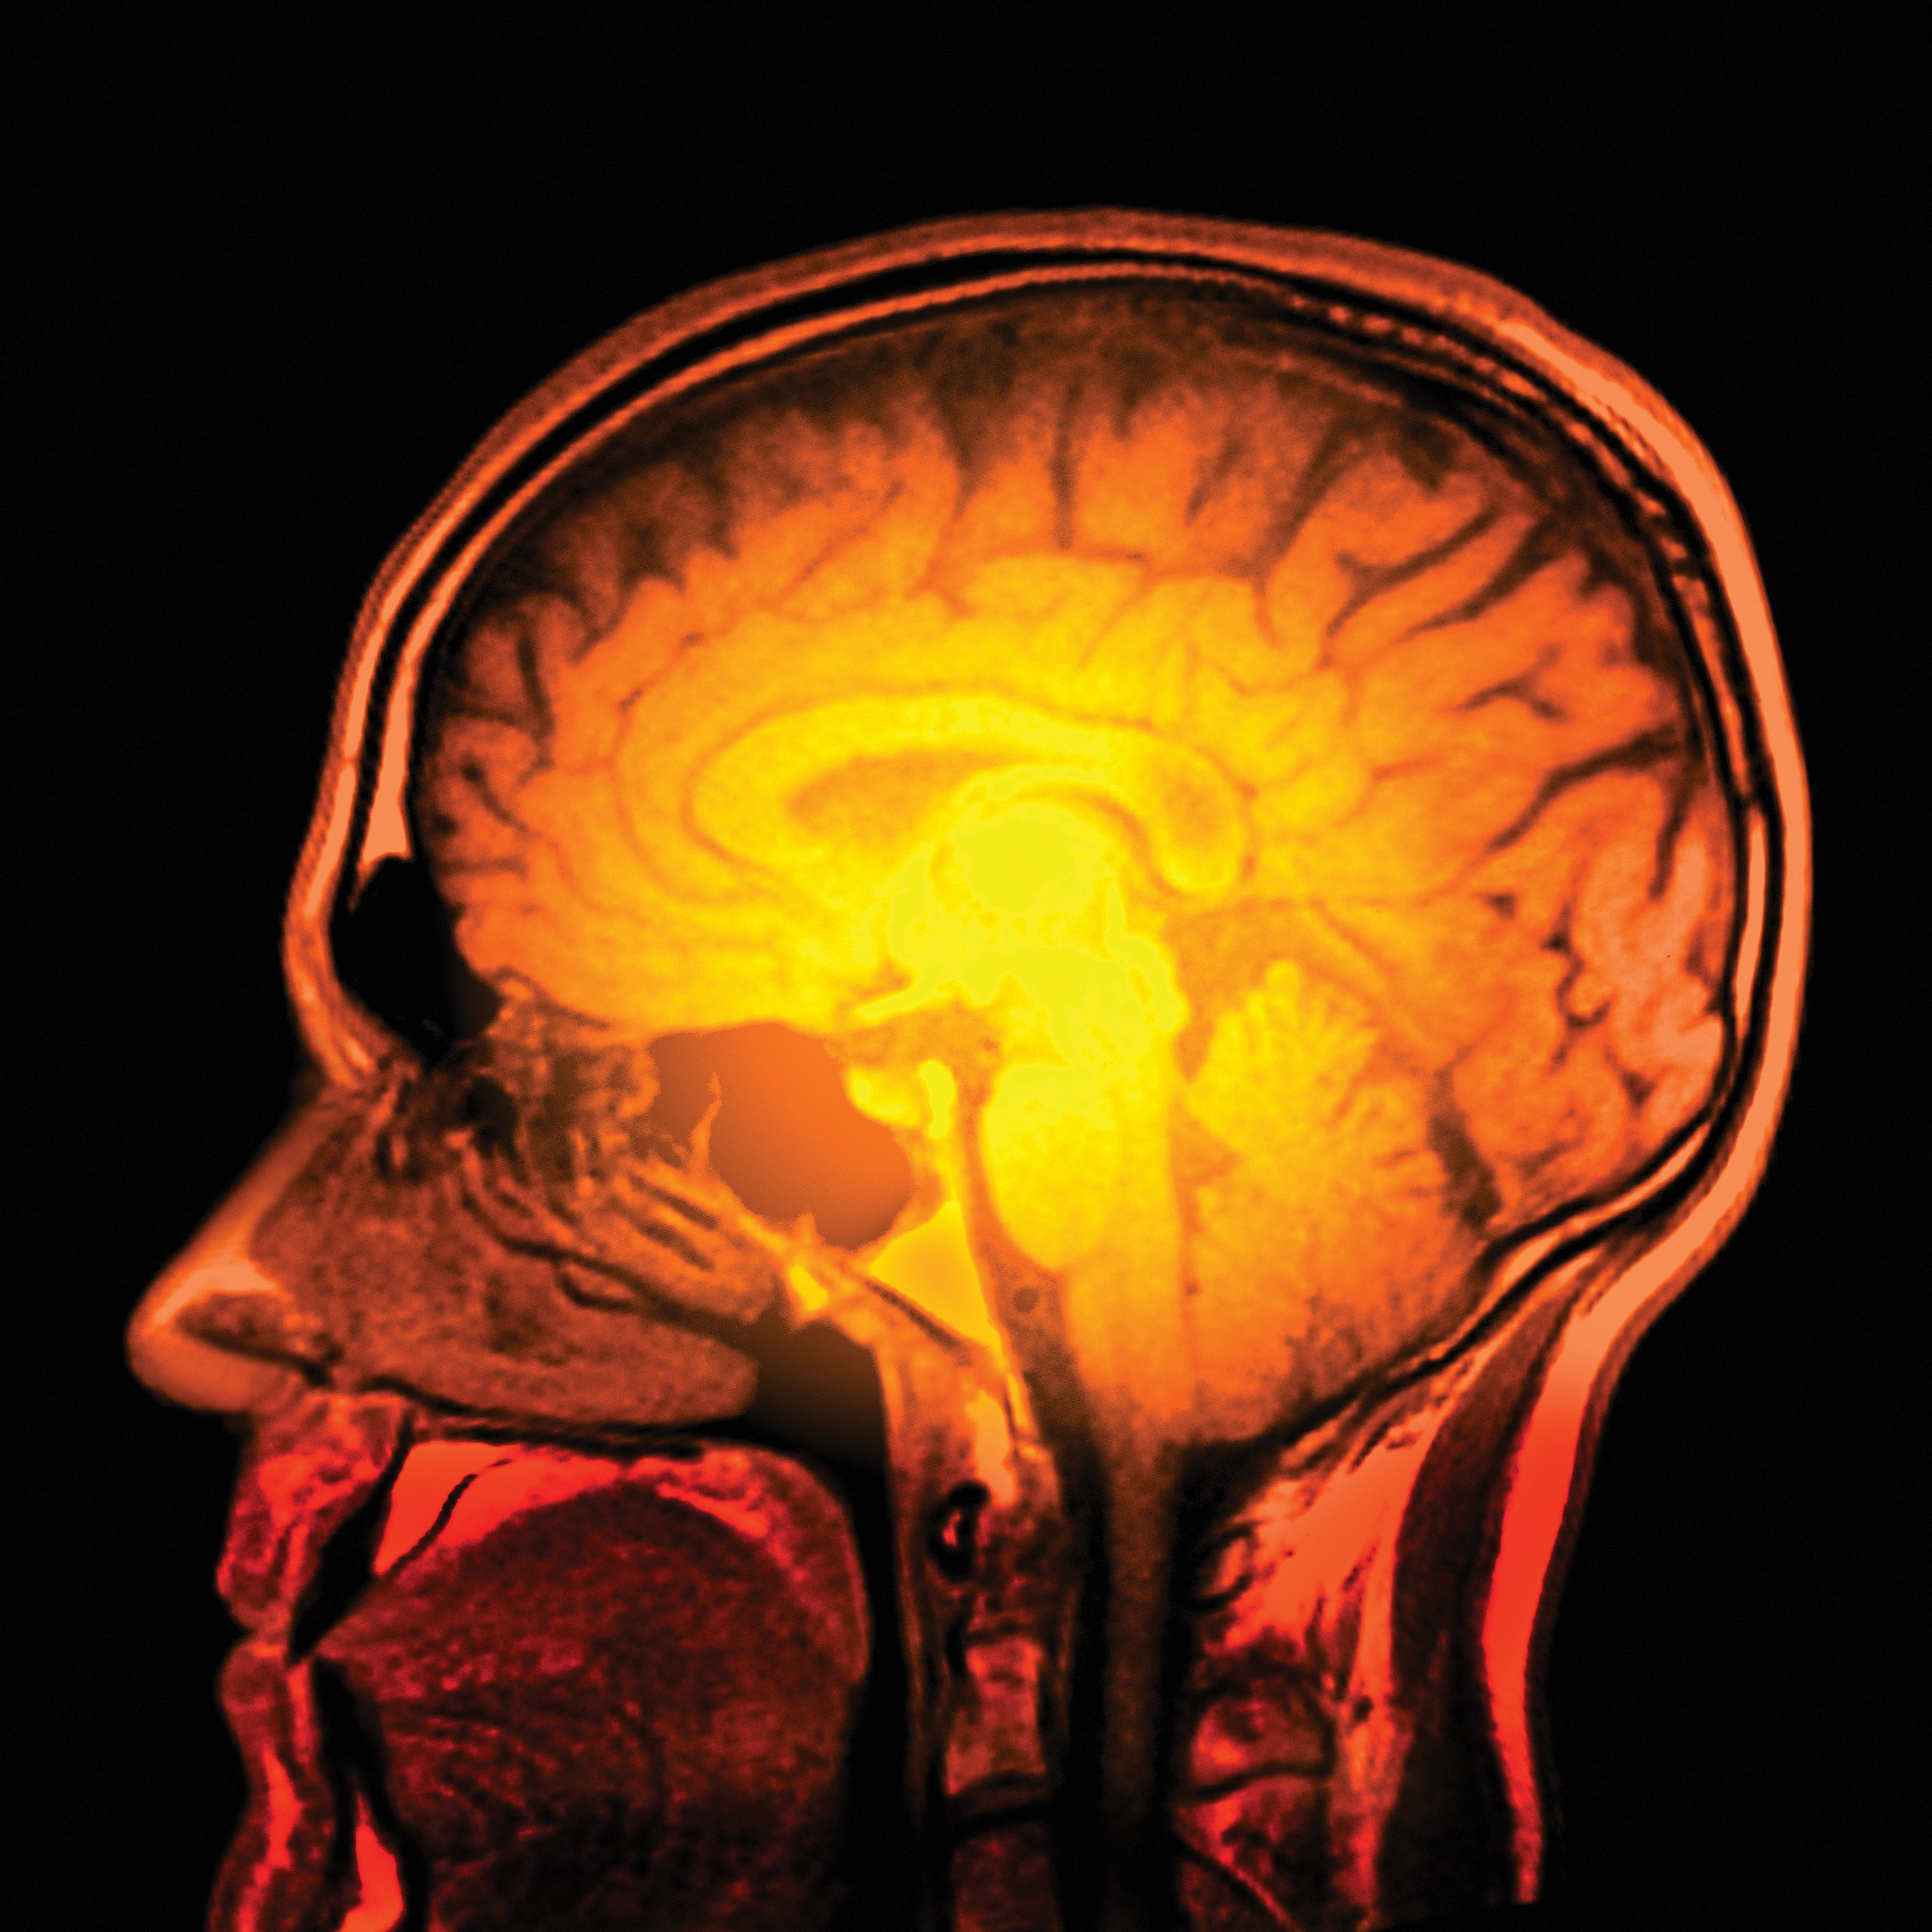 Yellow-toned MRI scan of a human head, showing the brain.